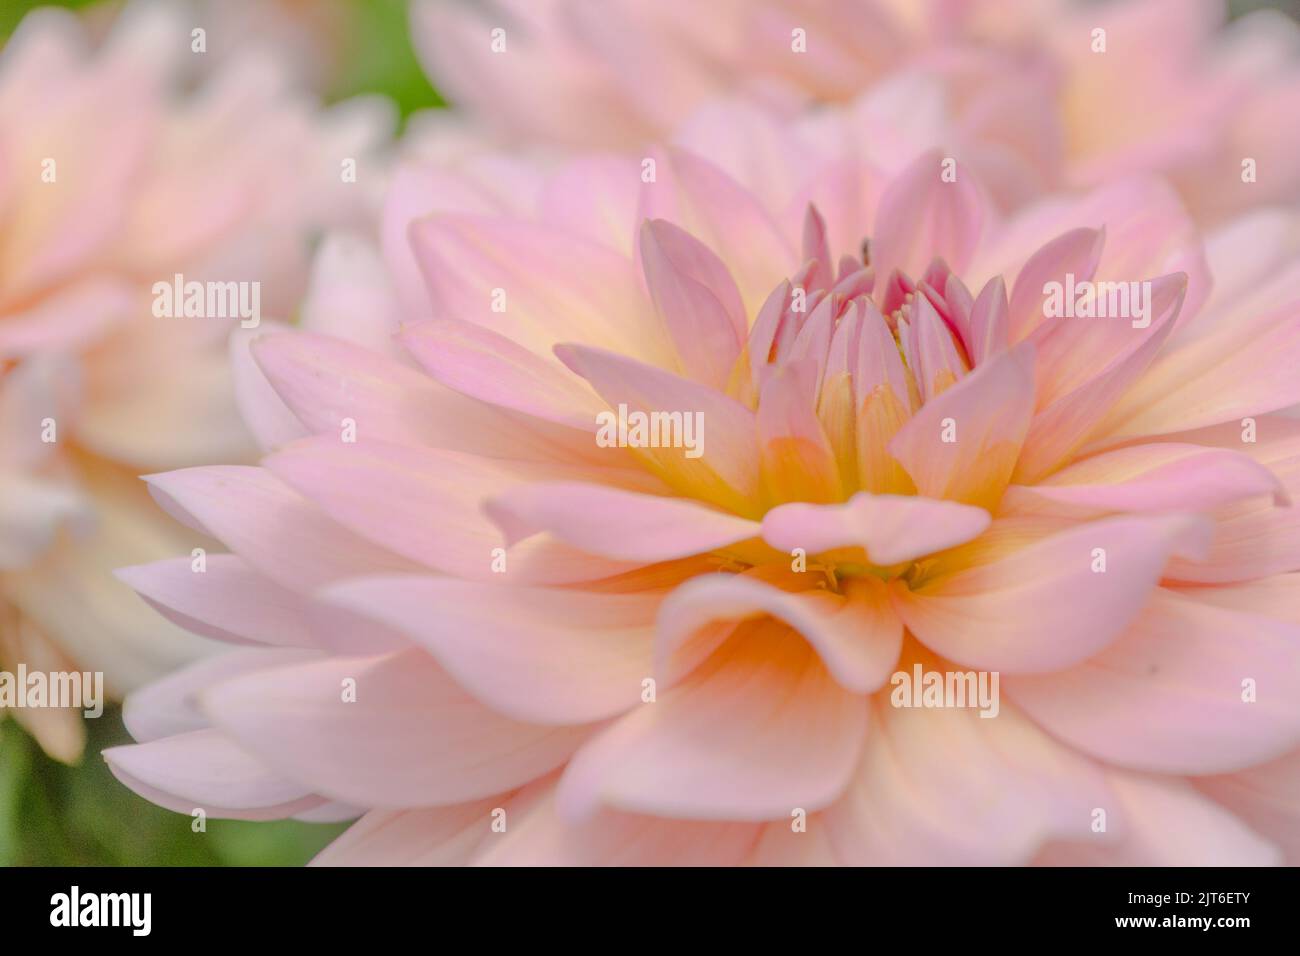 A velvety dahlia blossom in the softest pink and yellow tones. Stock Photo